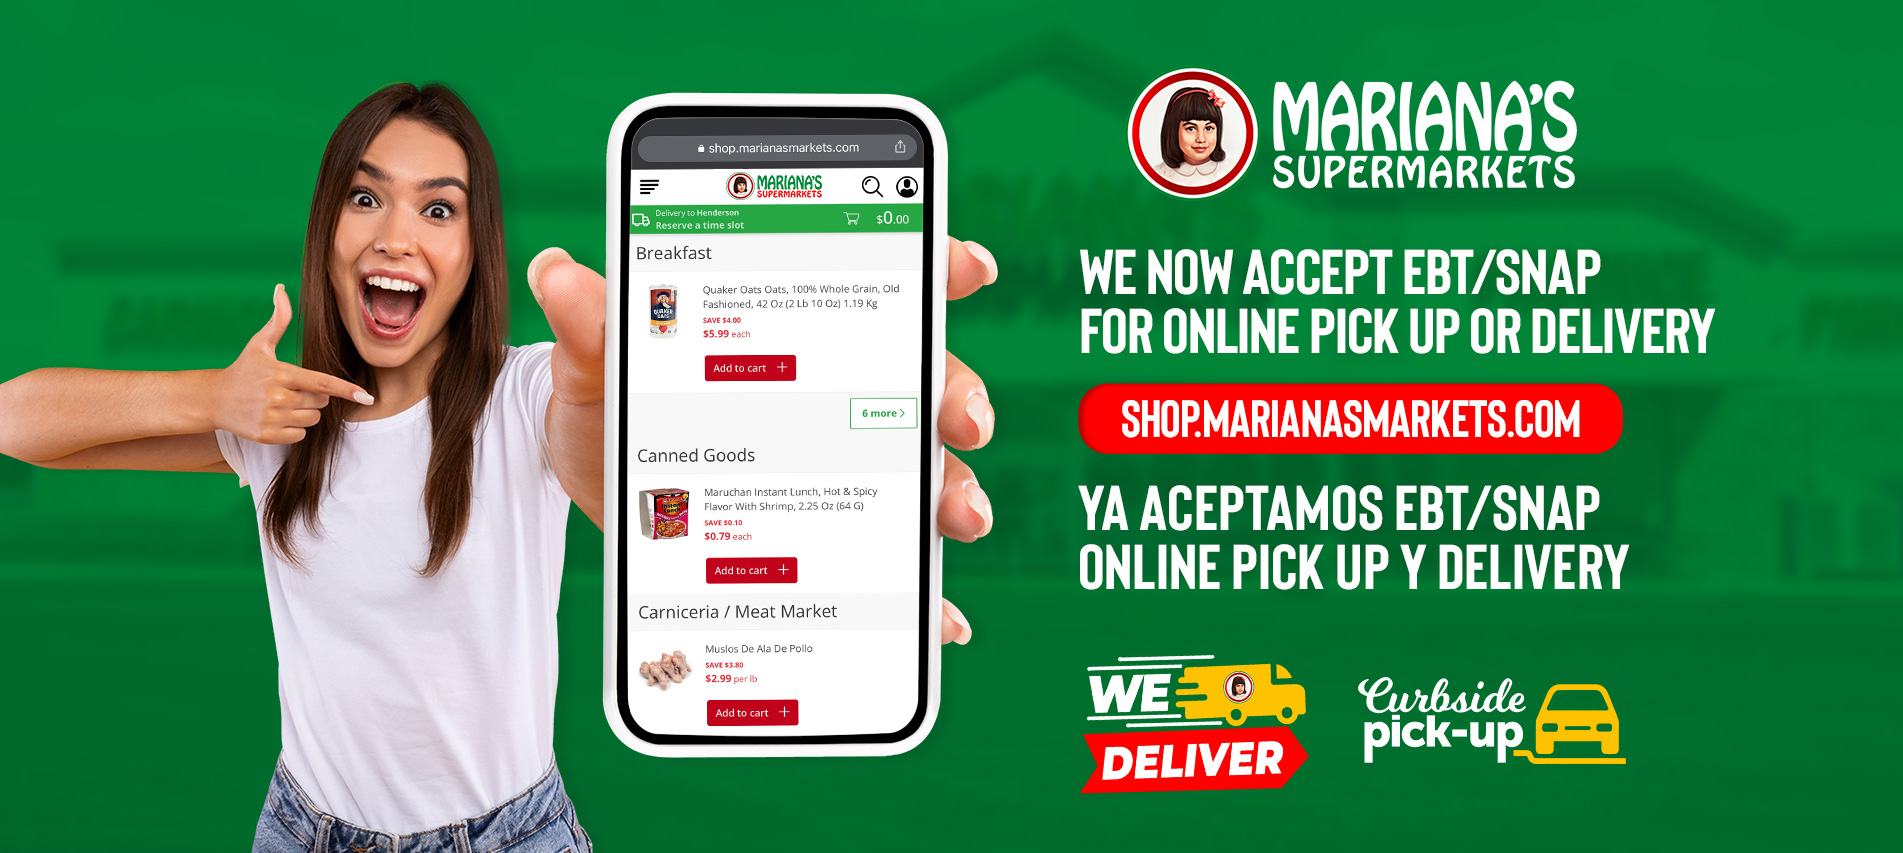 Free deliveryOrder from home get free delivery to your front door! https://shop.marianasmarkets.com only at there locations sahara & valley view, eastern & flamingo, jones & 95, cheyenne & civic center. only 10 miles from the store.